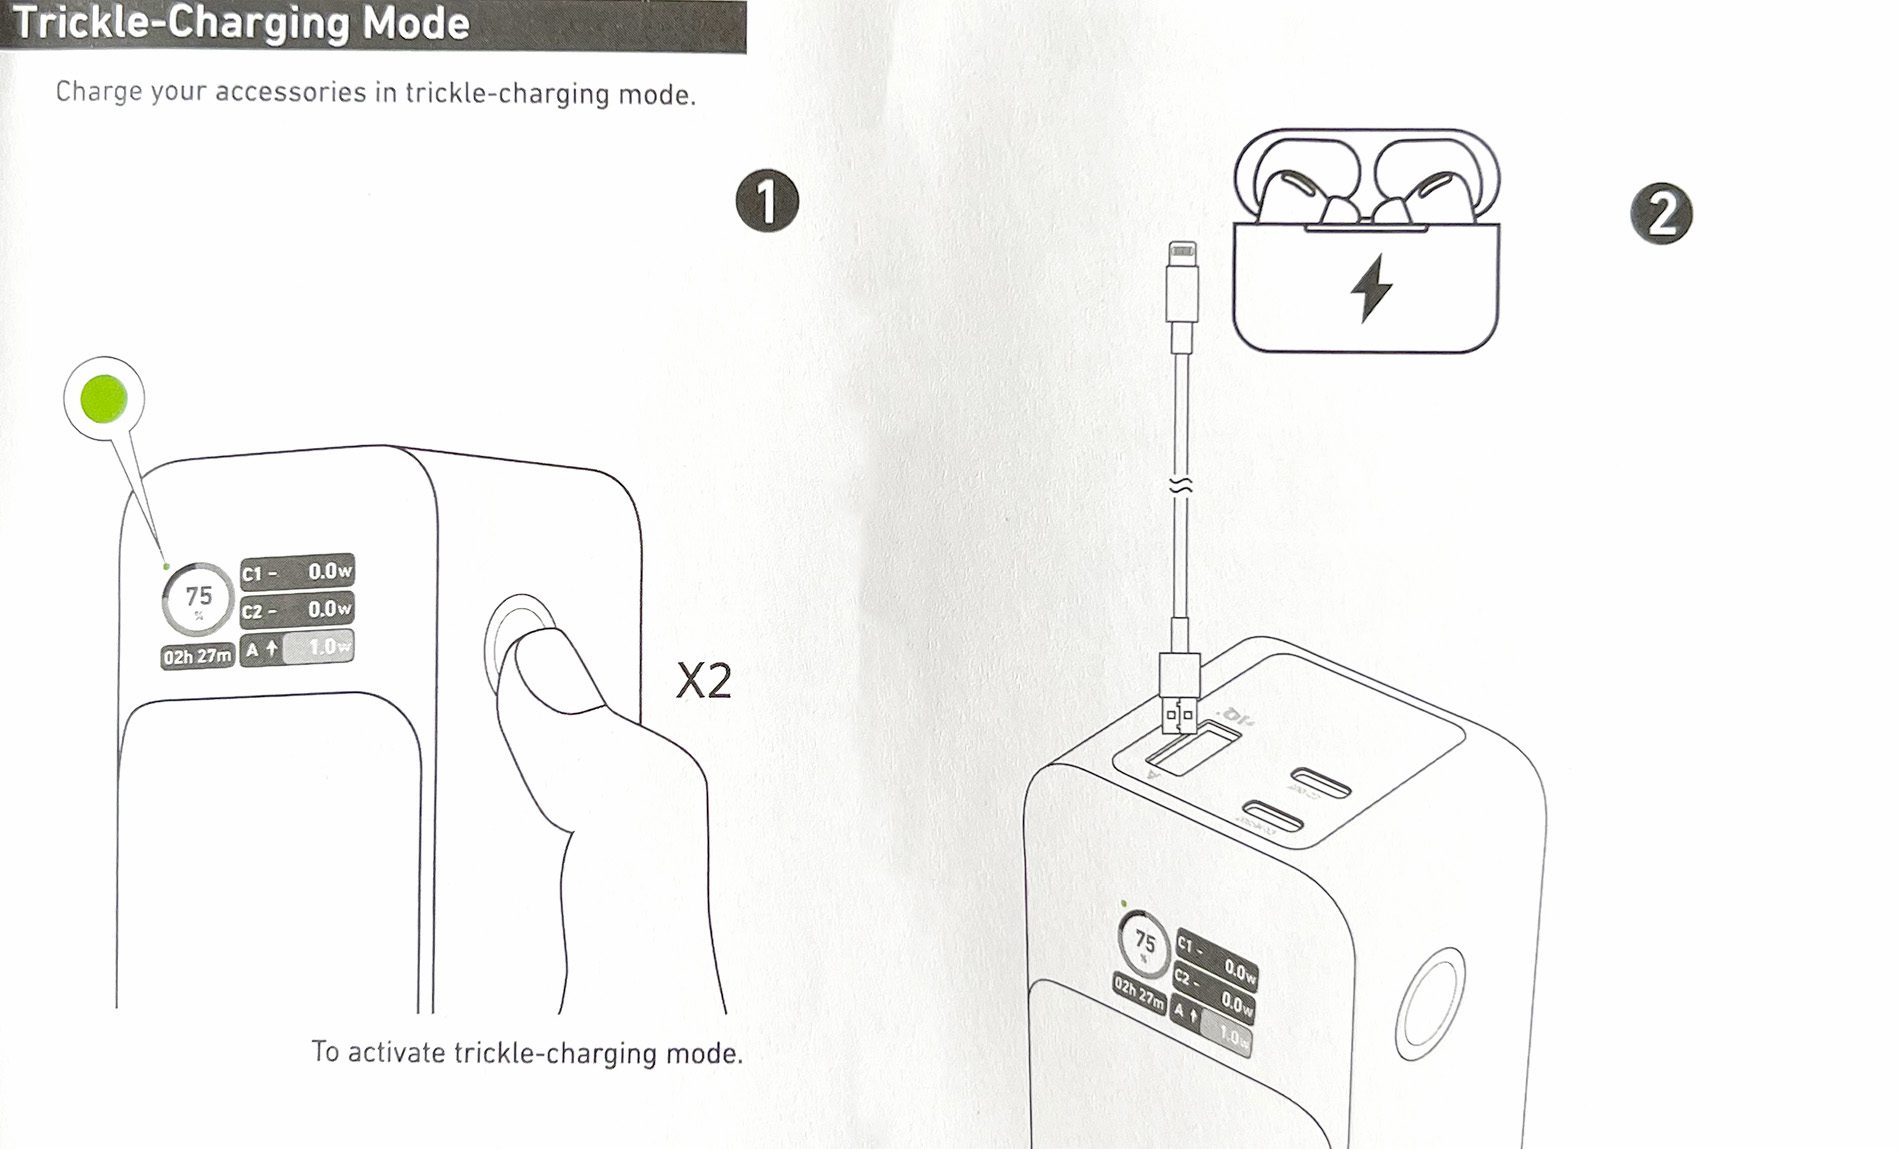 Trickle Charging can also be used to charge devices with a low charging current: AirPods, AirPods Pro, Apple Watch and Magic Mouse, for example.